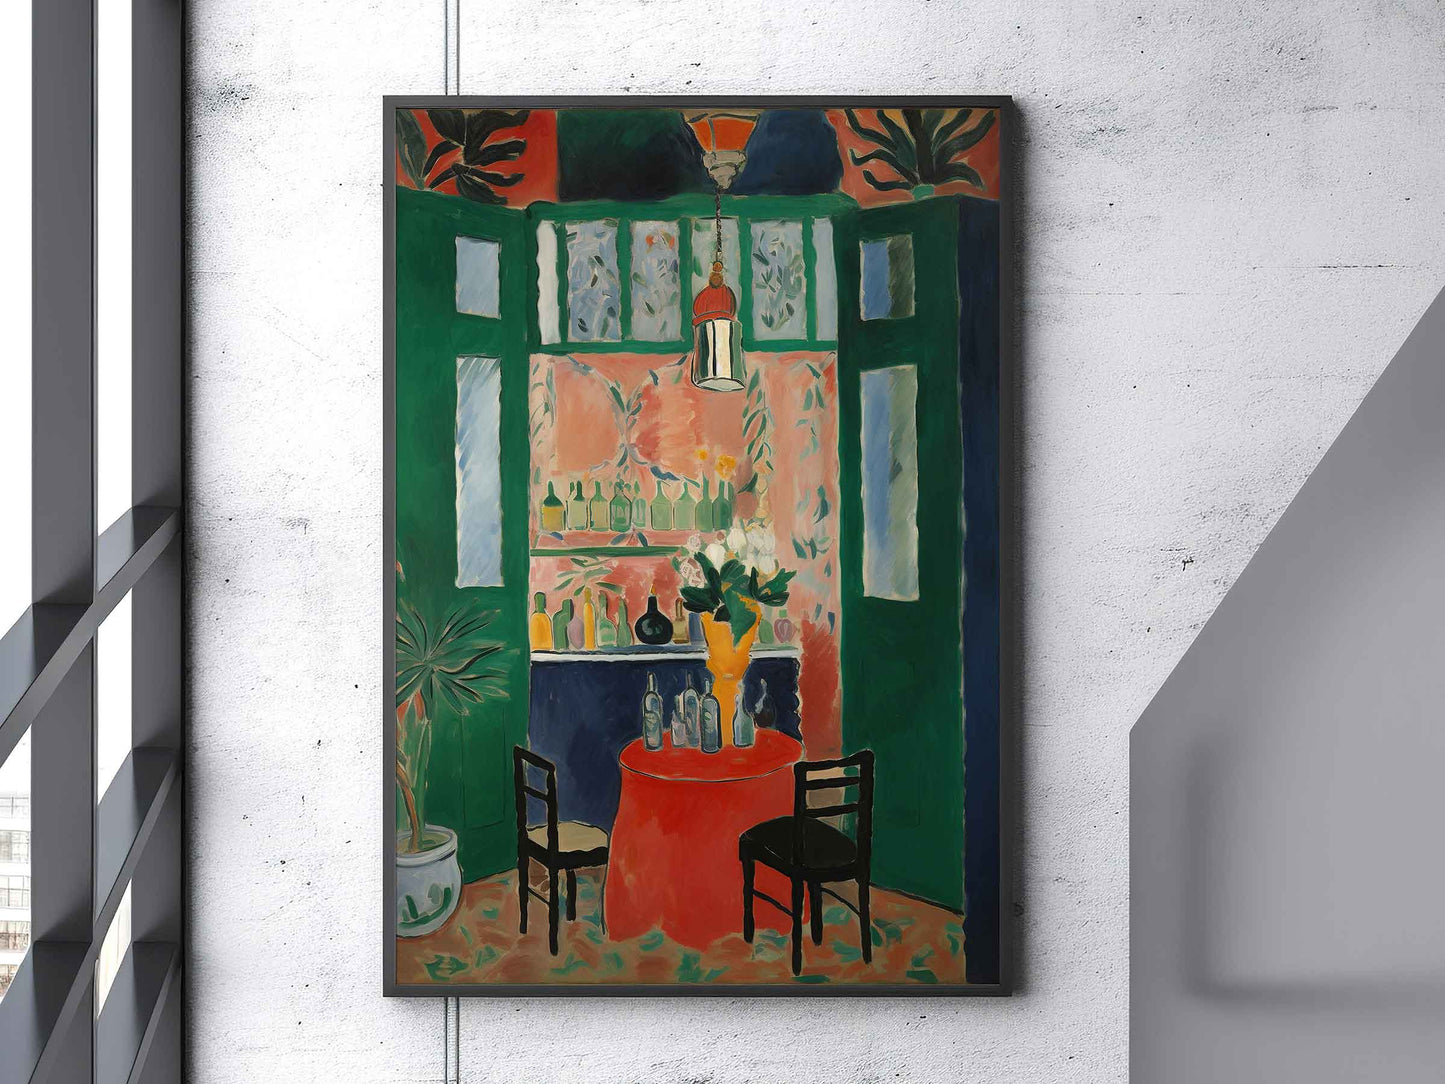 Framed Image of Matisse Style Wall Art Poster Prints Garden & Window Oil Paintings